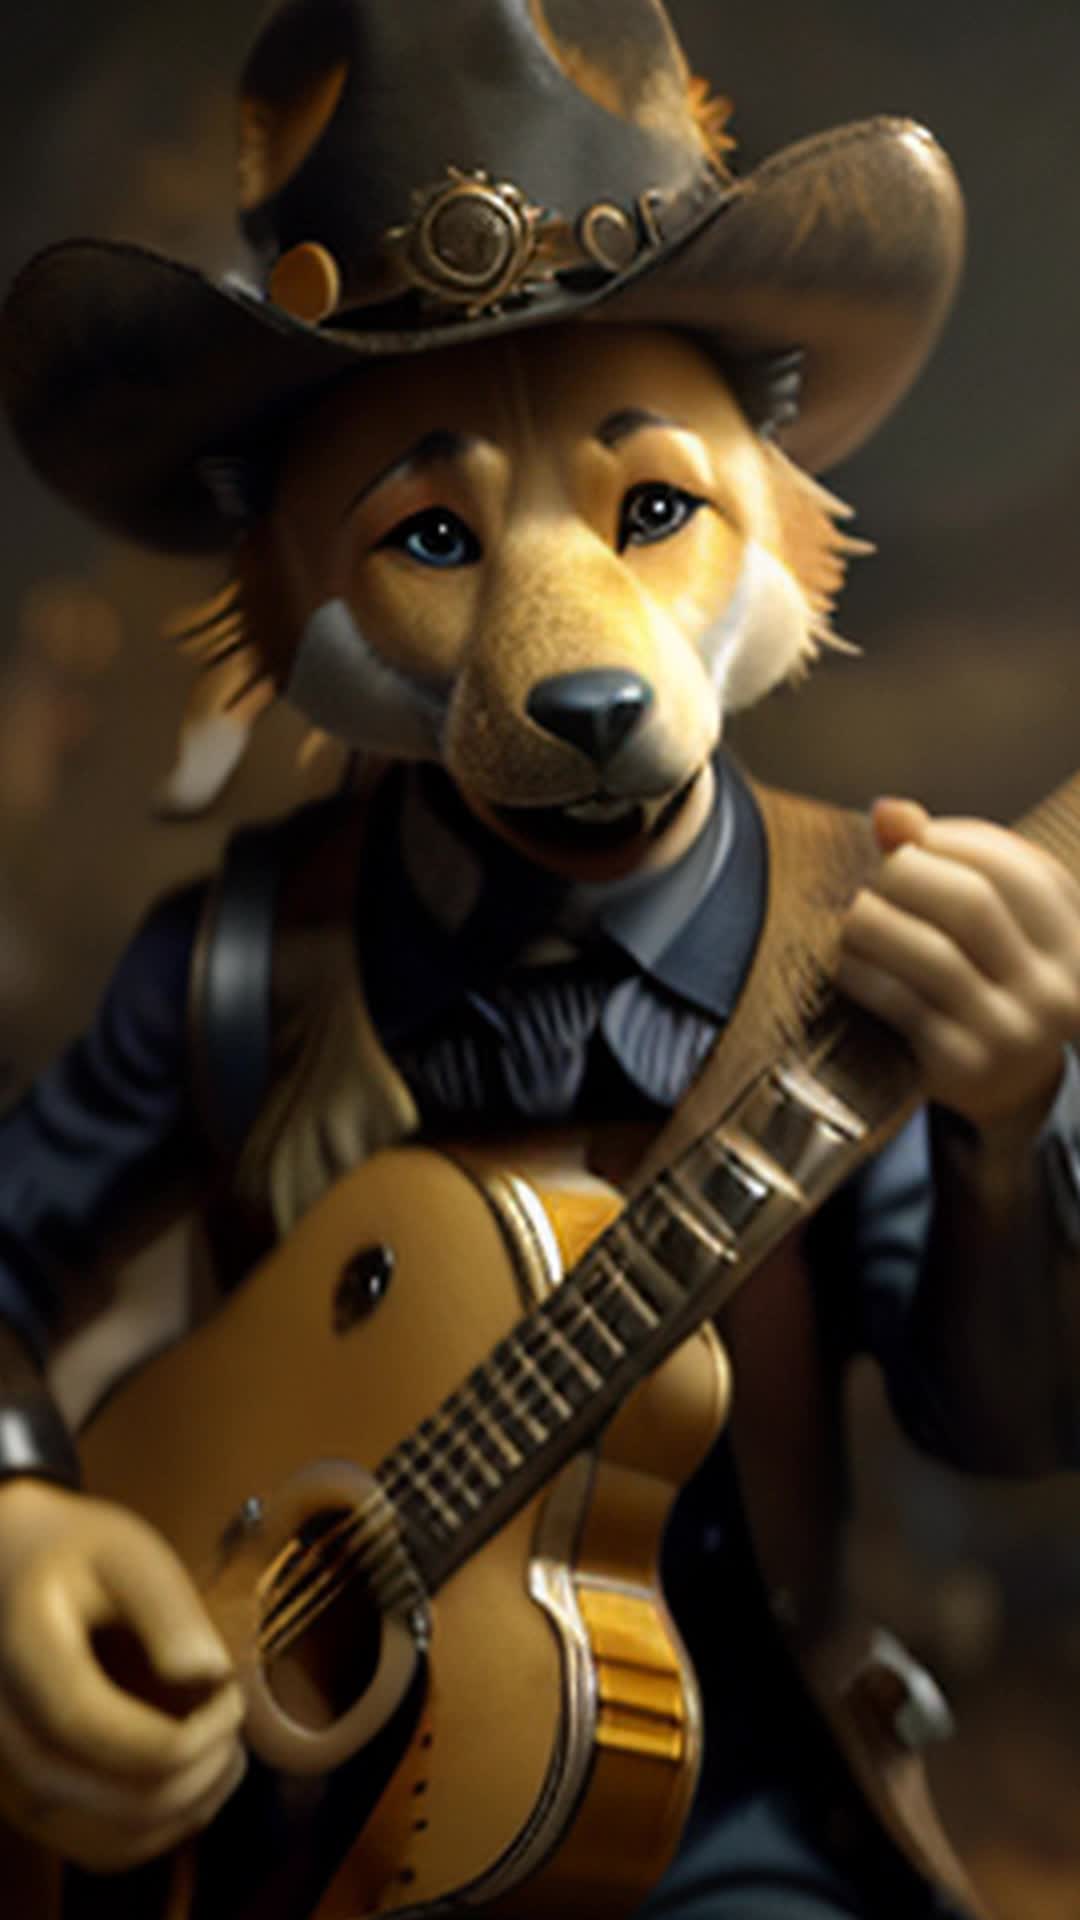 Cowboy Dingo, steampunk style, intricate mechanical gear outfit, playing guitar, glowing brass and copper details, steam rising softly, cybernetic enhancements, clockwork guitar with spinning gears, oil lamps casting warm light, Victorianera influence, misty atmosphere, soft shadows, dramatic backlighting, full body shot, highly detailed, rendered by octane